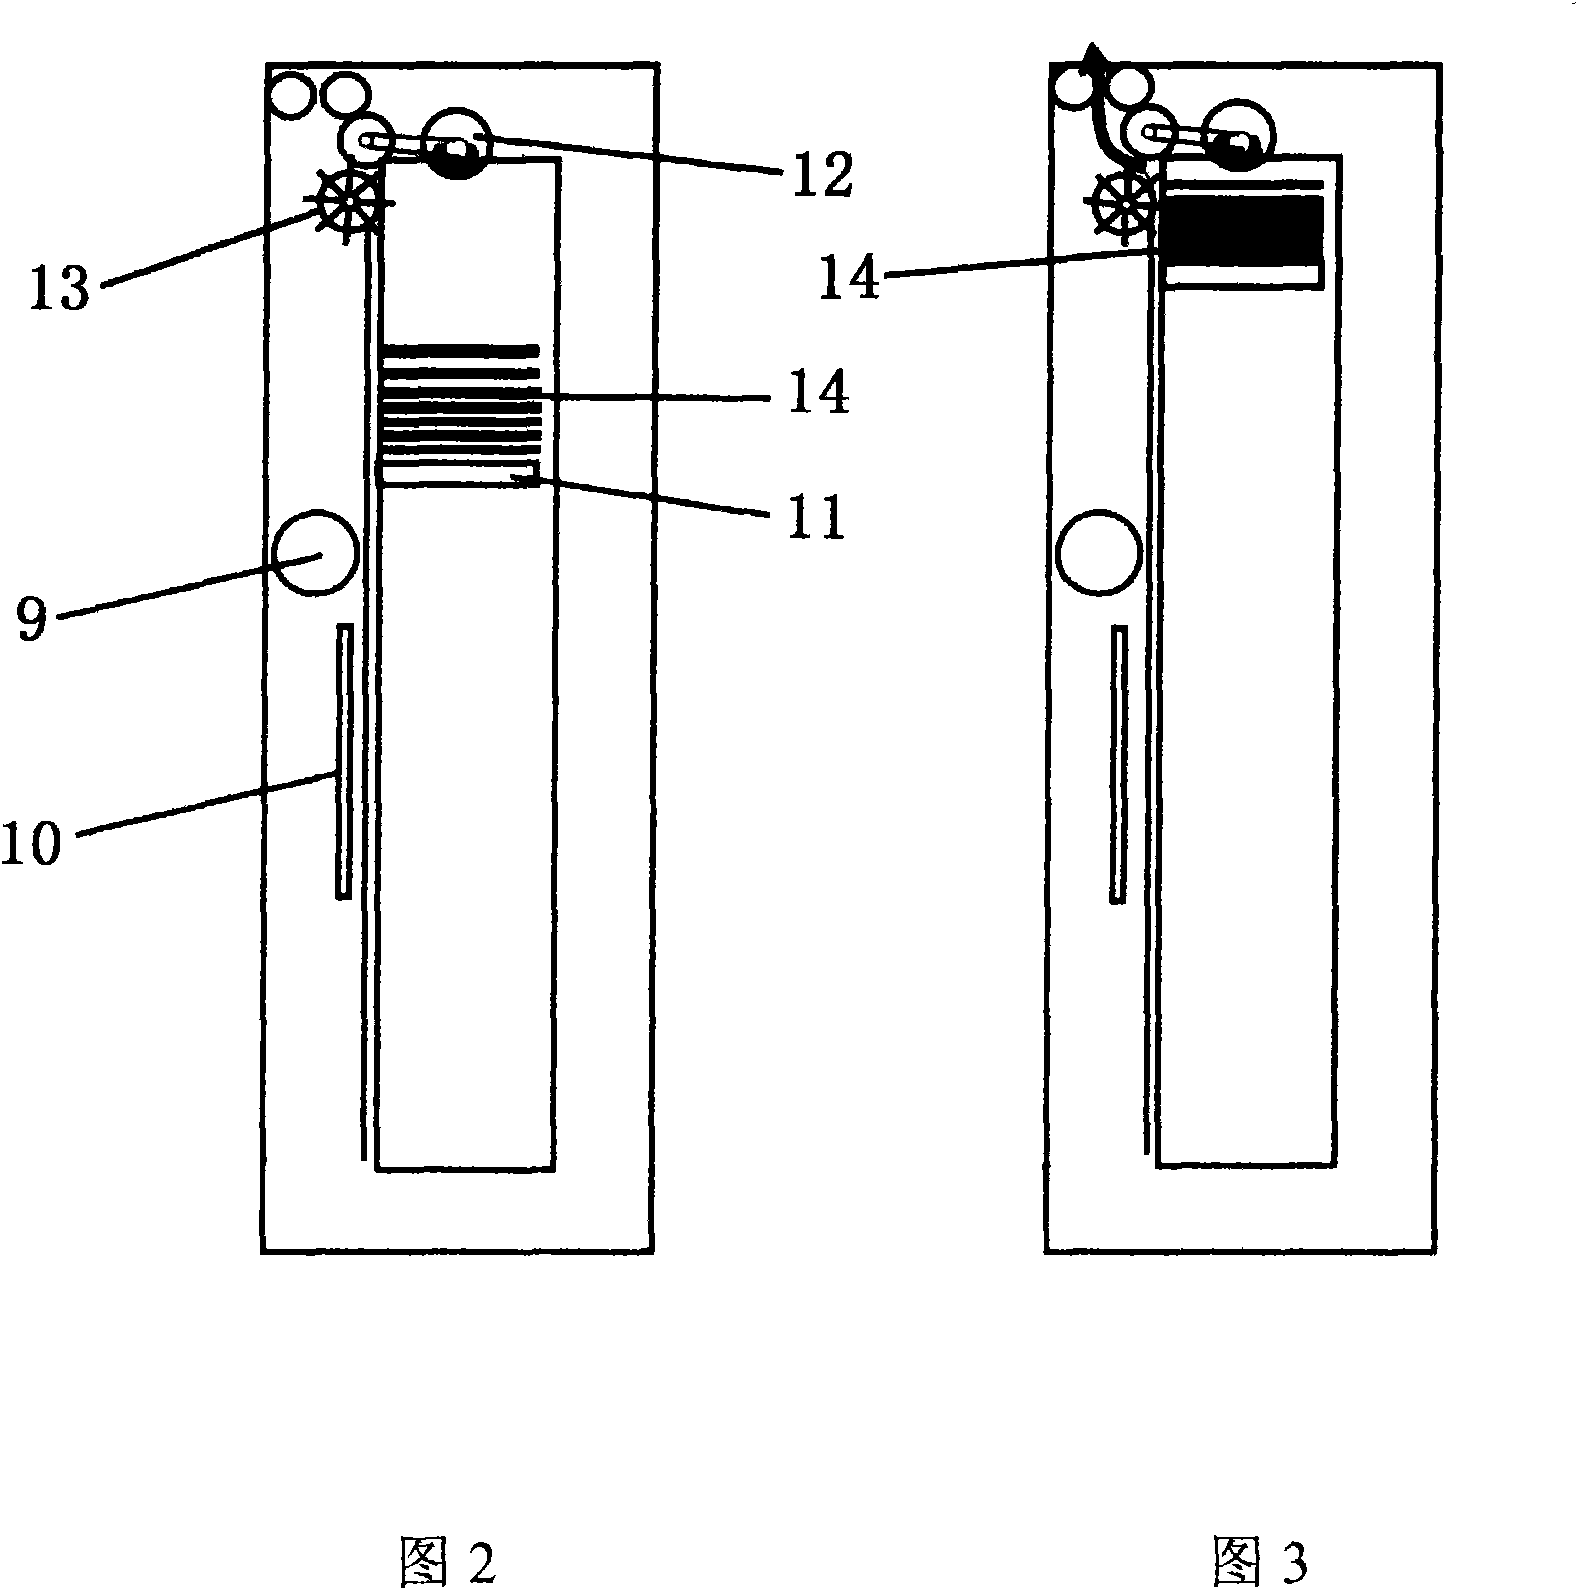 Method of automatic recovering use when money cassette is closed